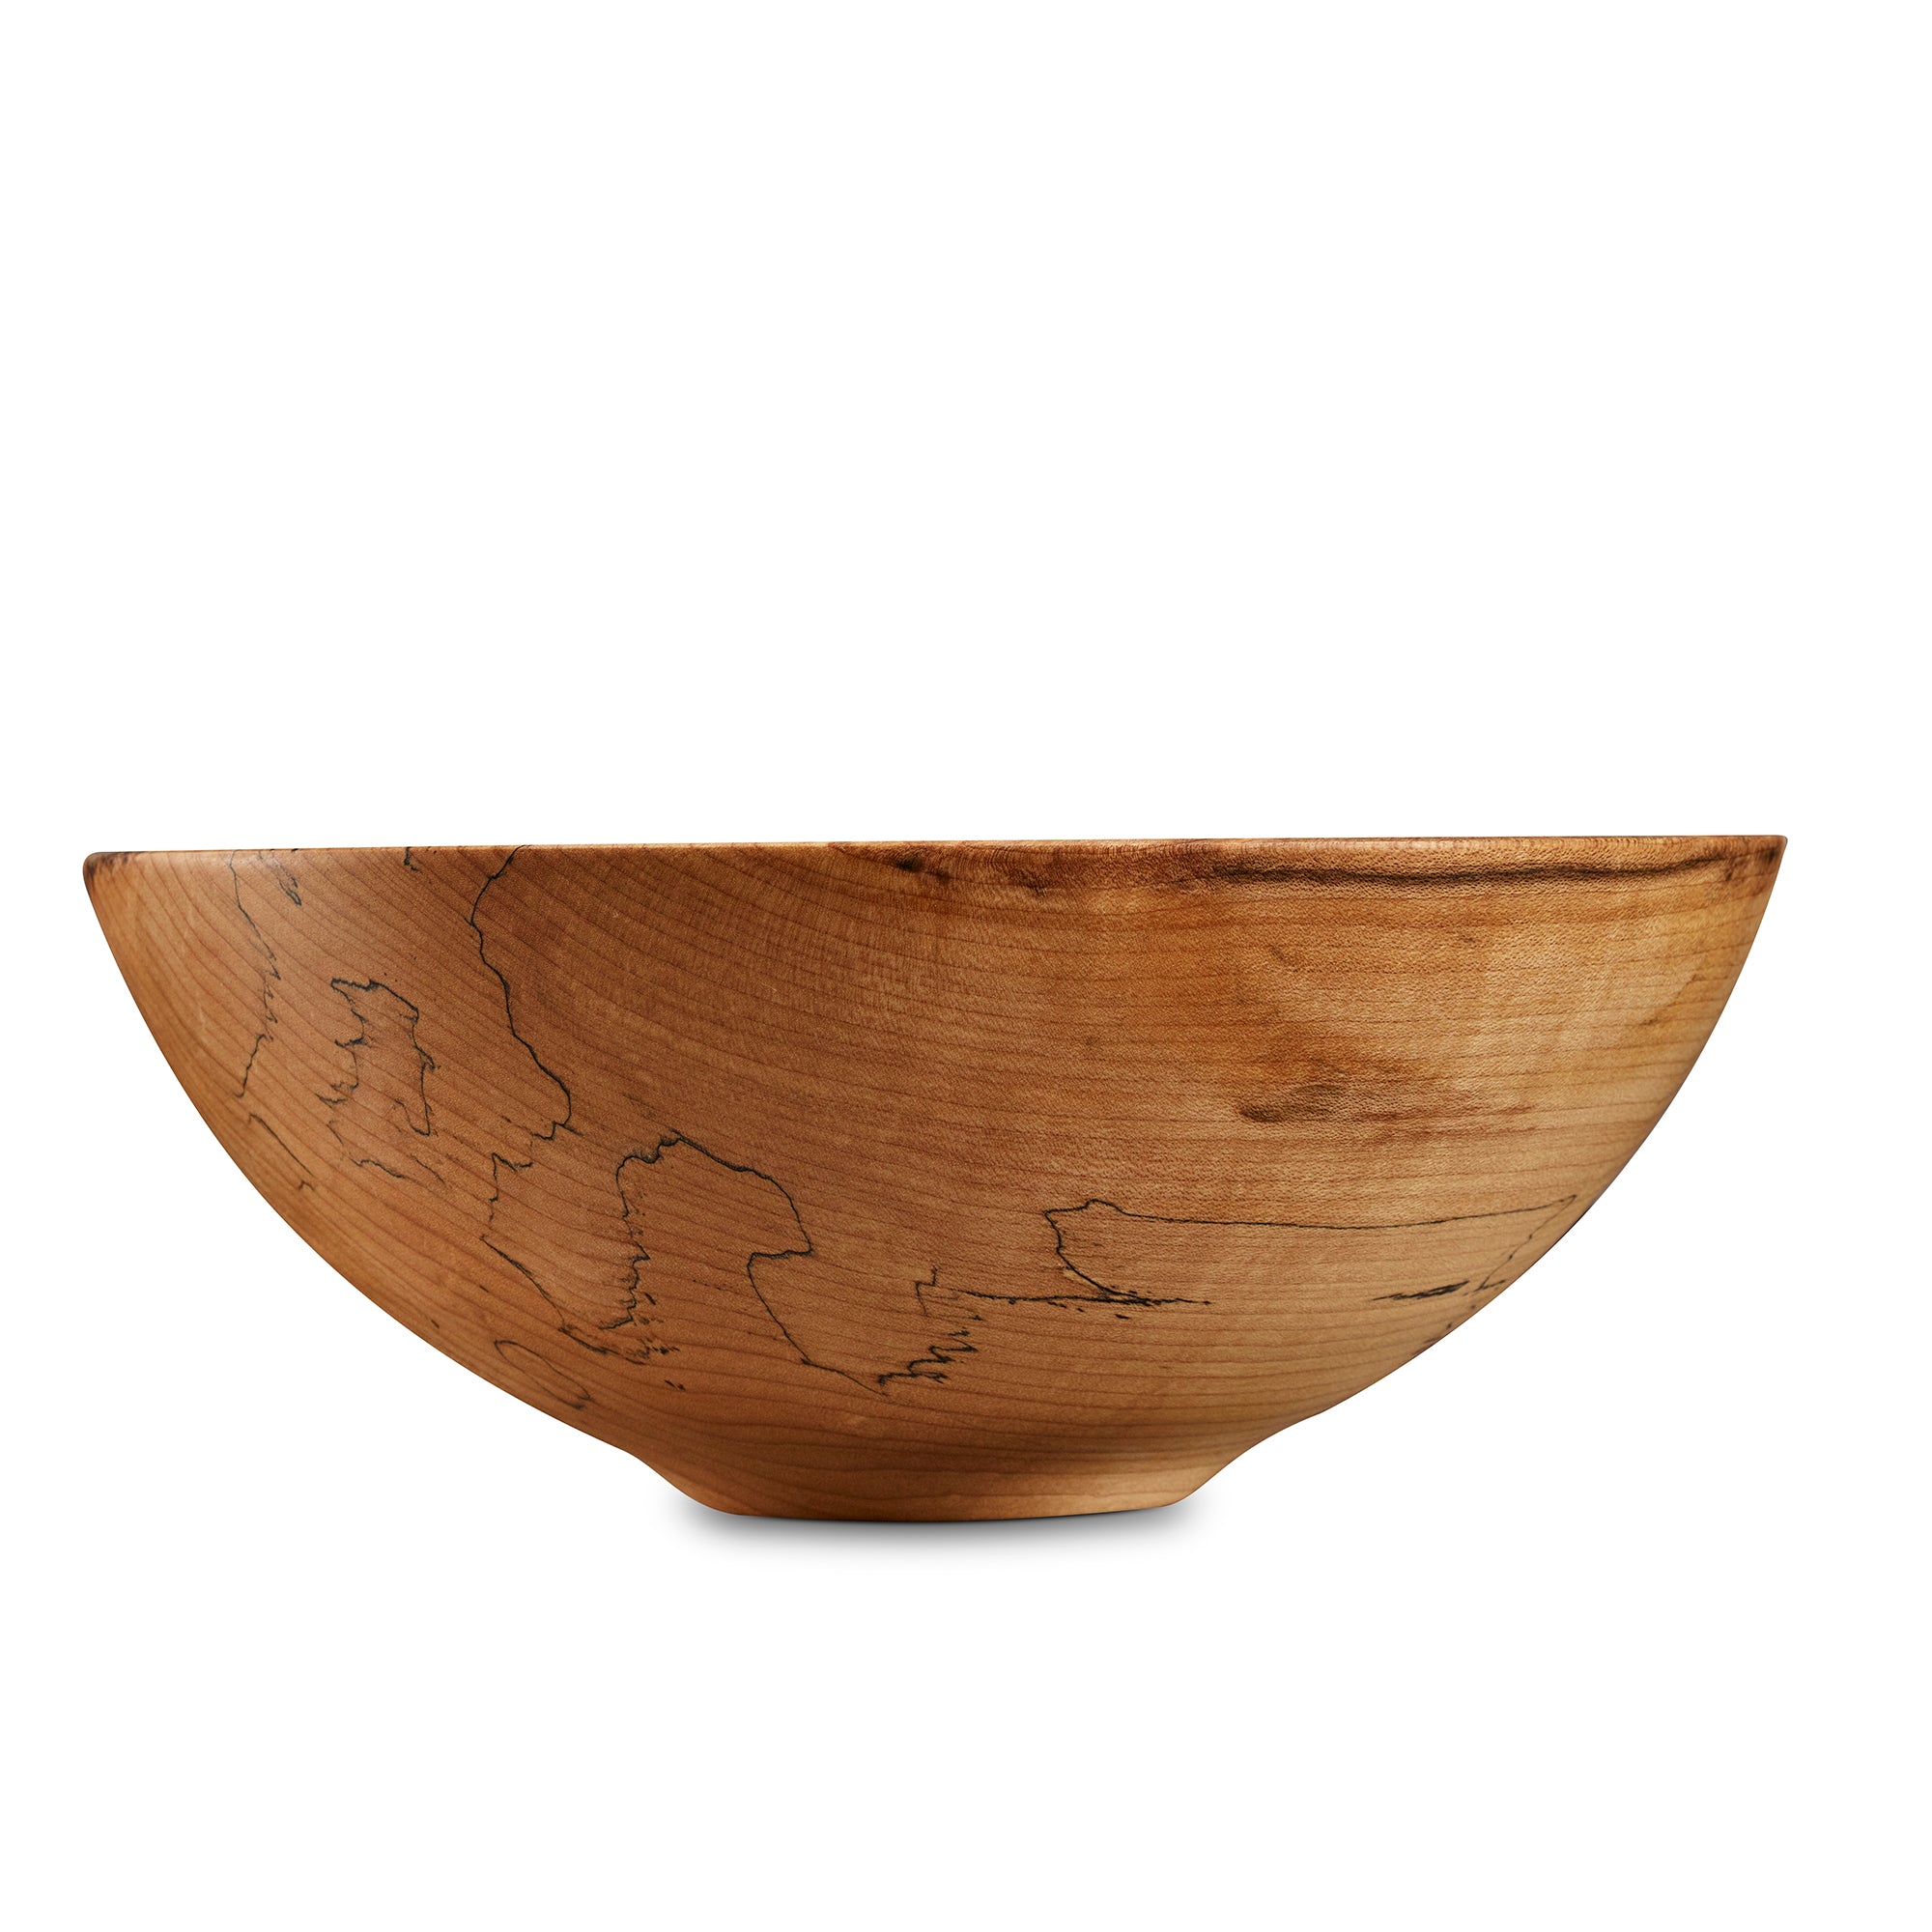 Light colored hard maple wooden bowl